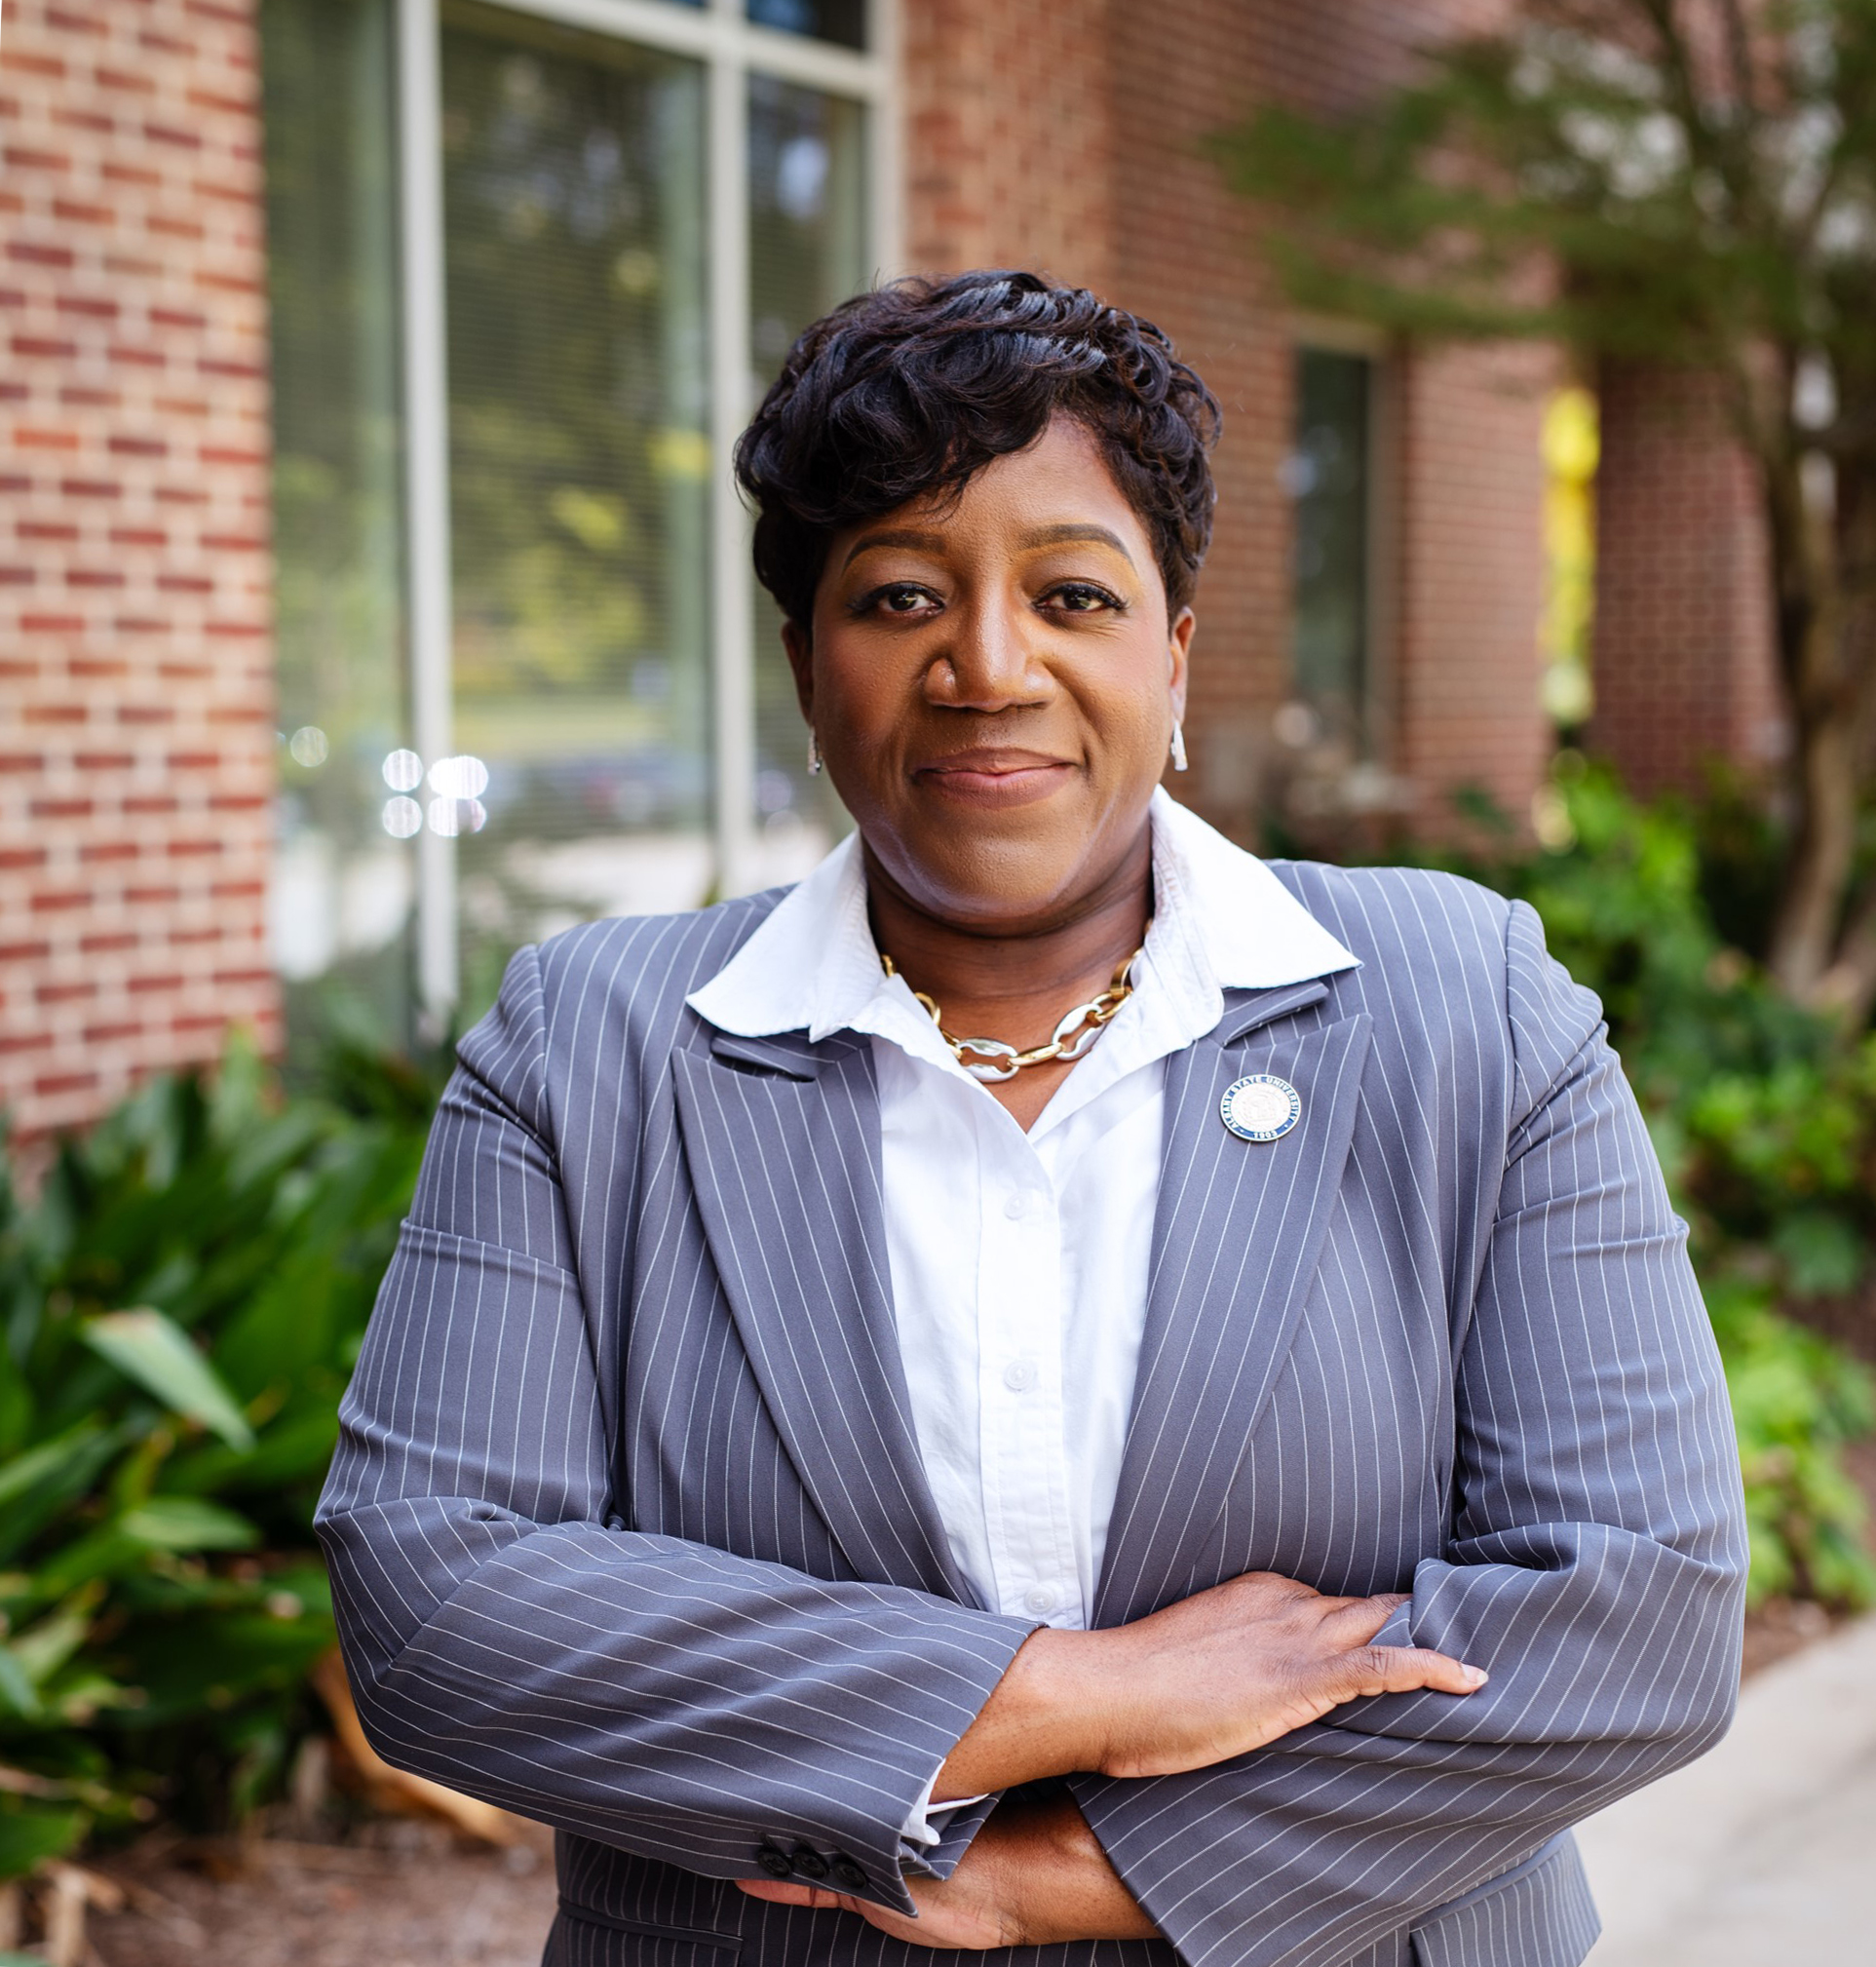 Albany State University's President is Stepping Down: Here's Why